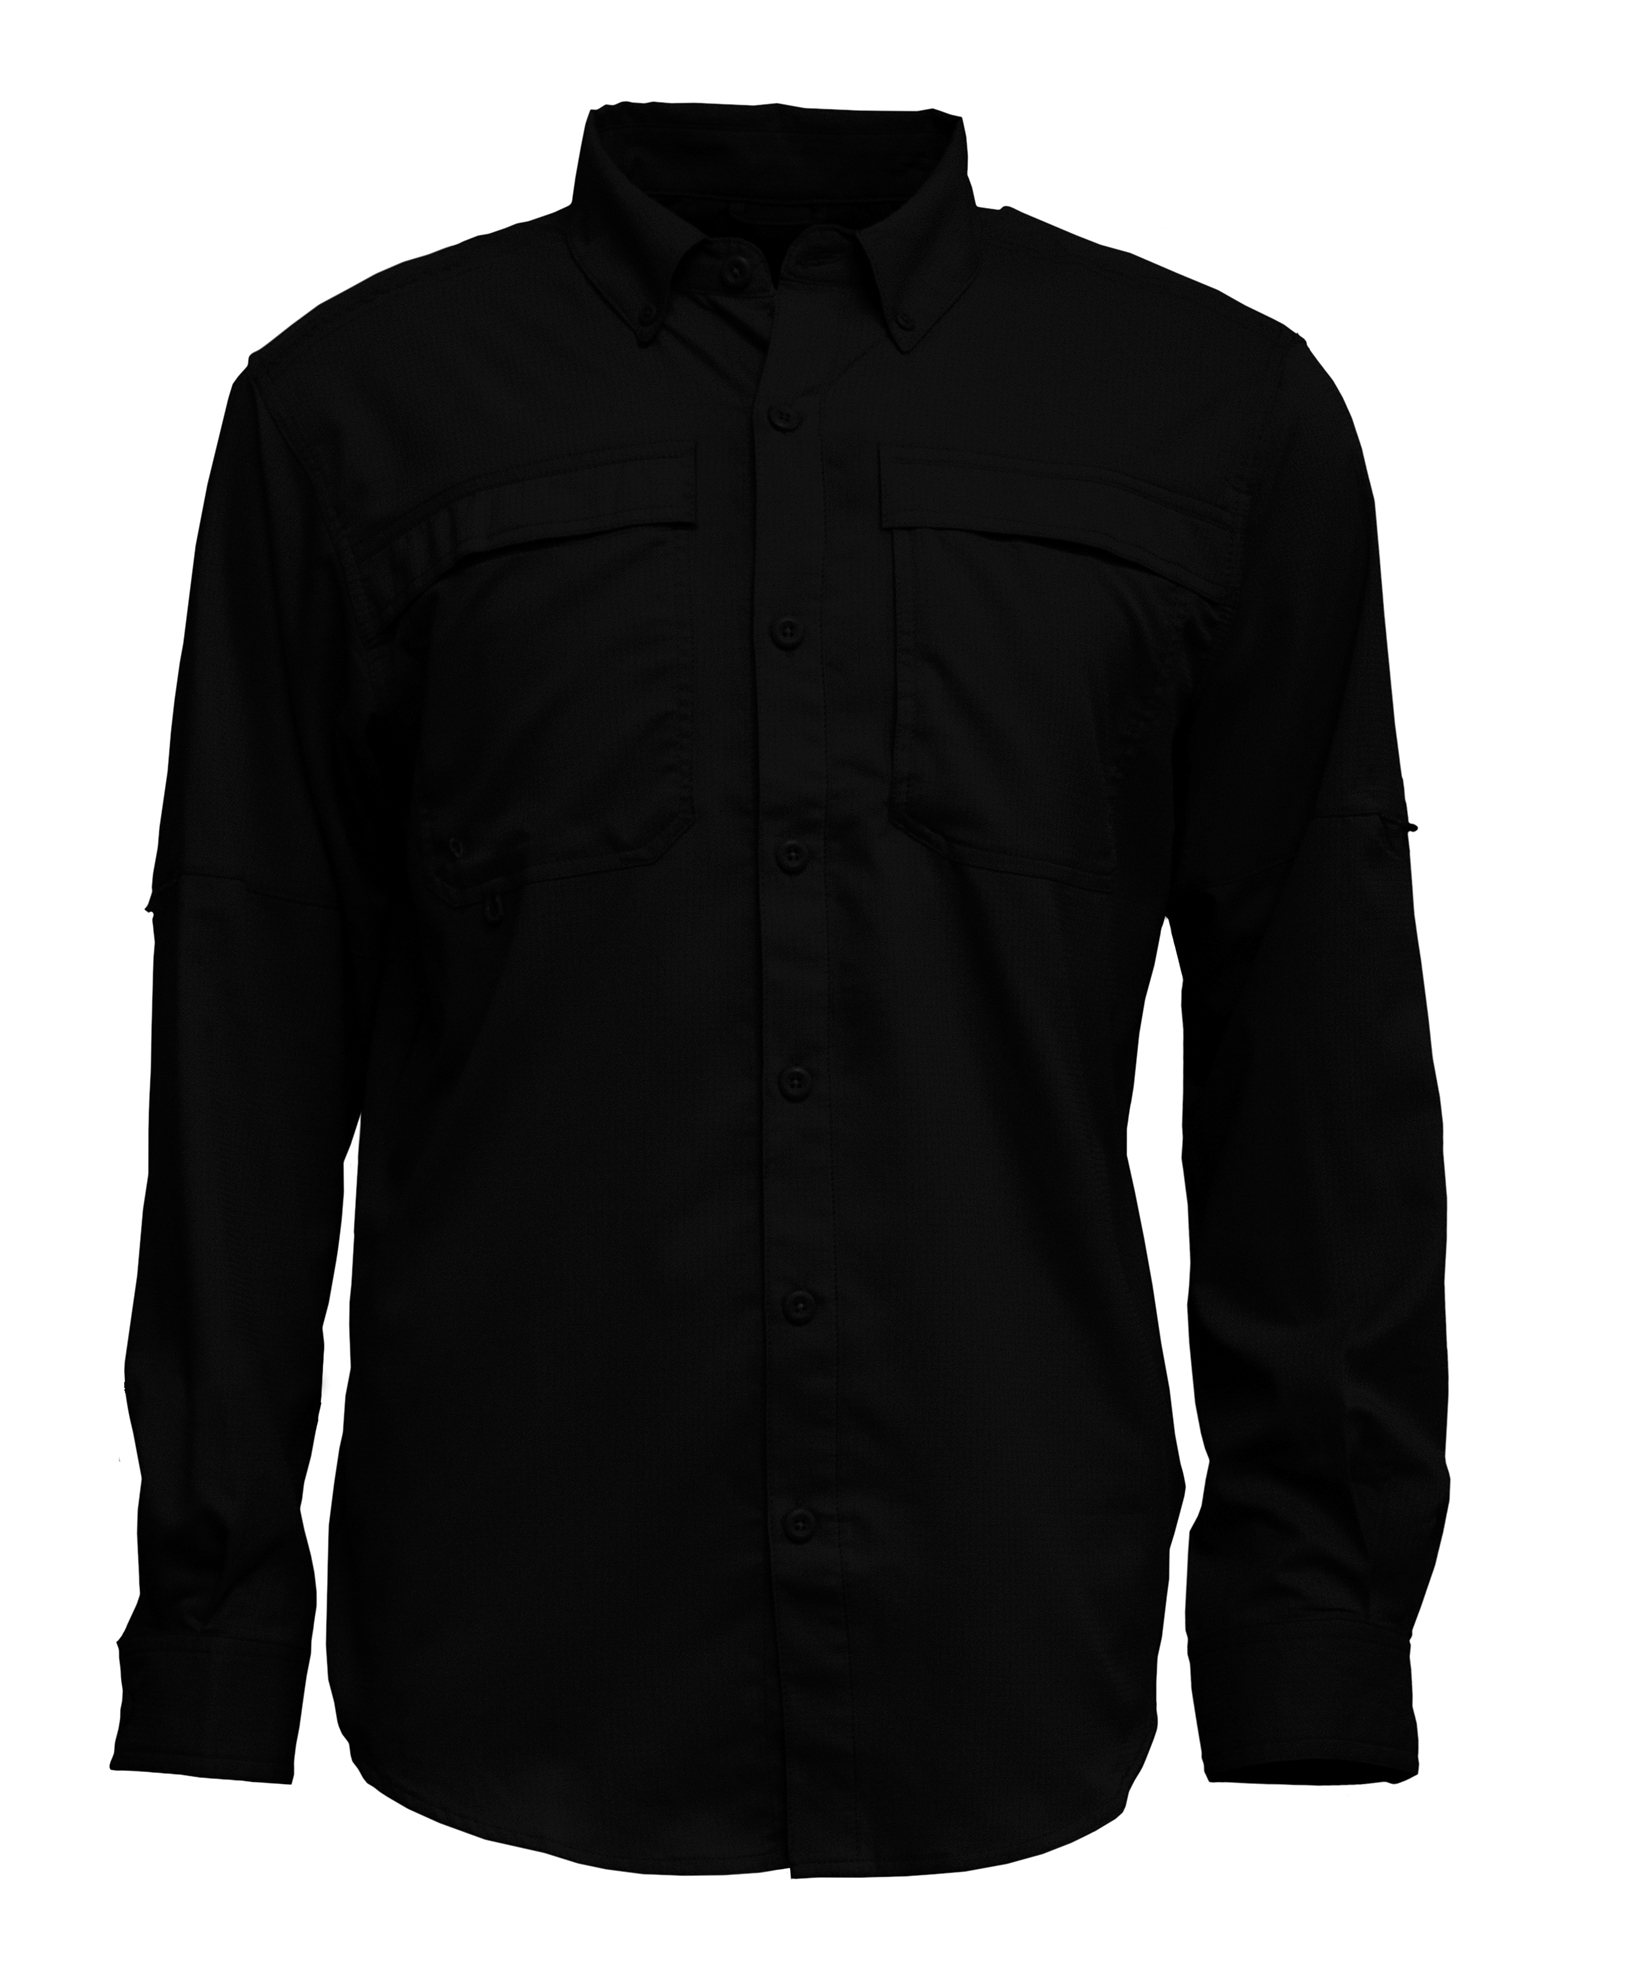 BAW Athletic Wear 3300 adult Long Sleeve Fishing Shirt with Button Down Collar Black